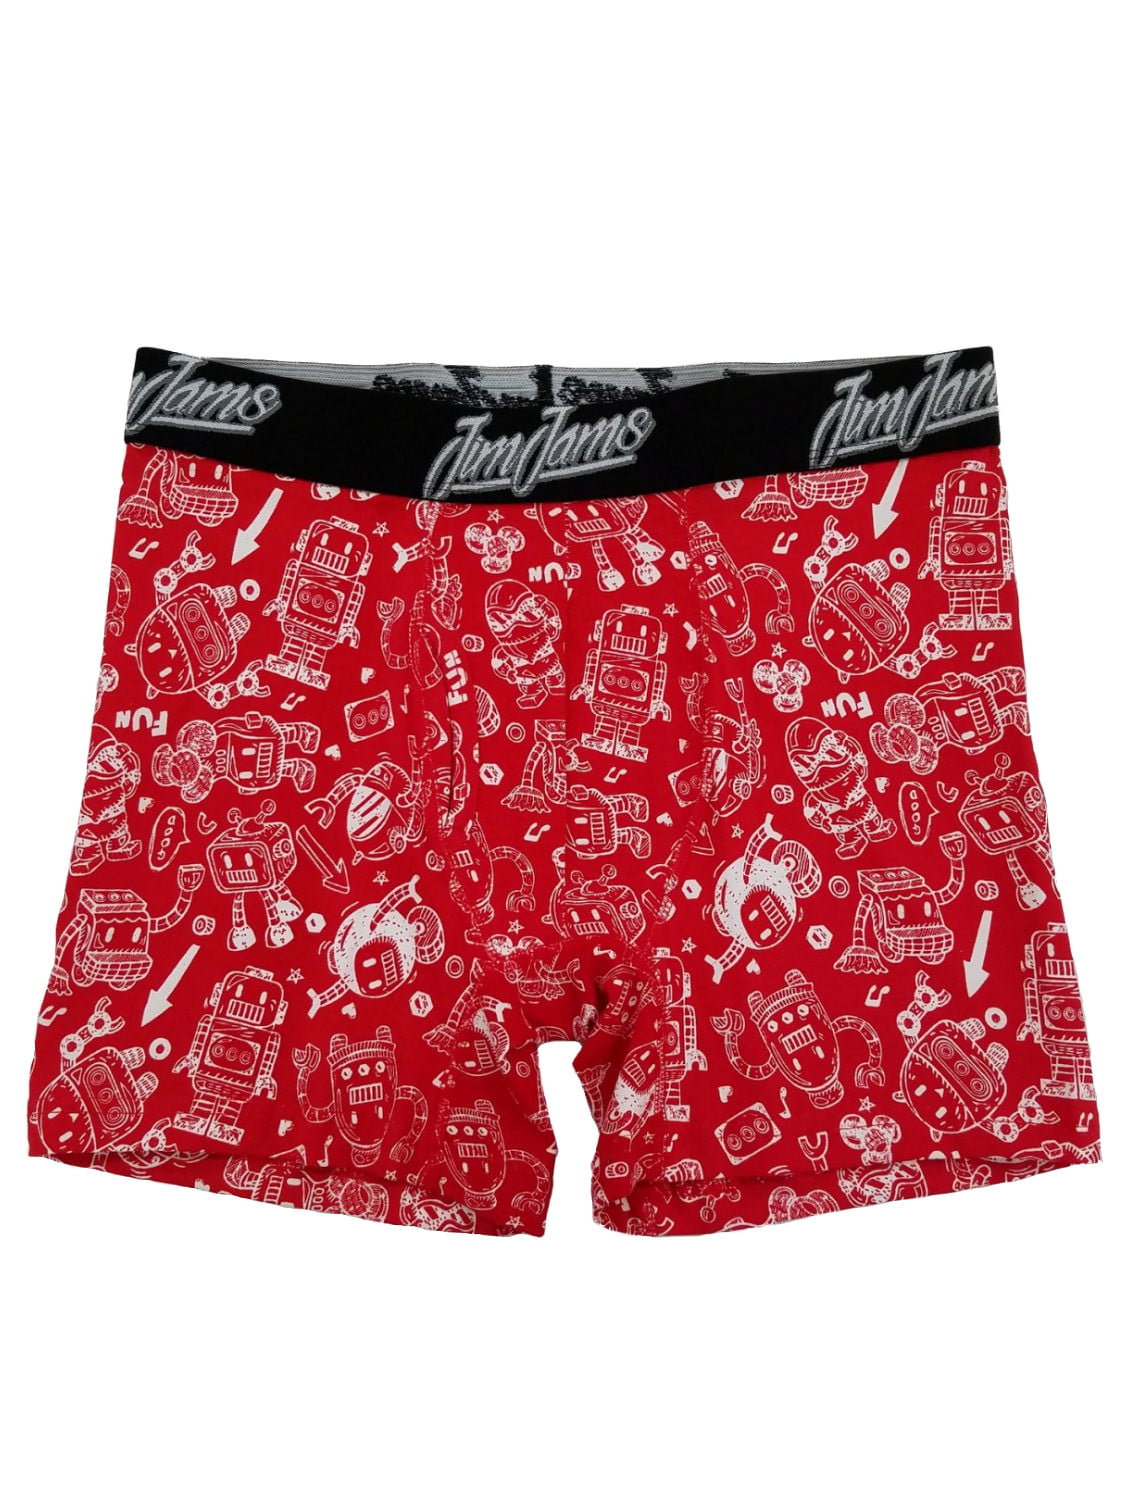 Pmftryuer Mens Red Candles Underwear Boxer Briefs Underpants